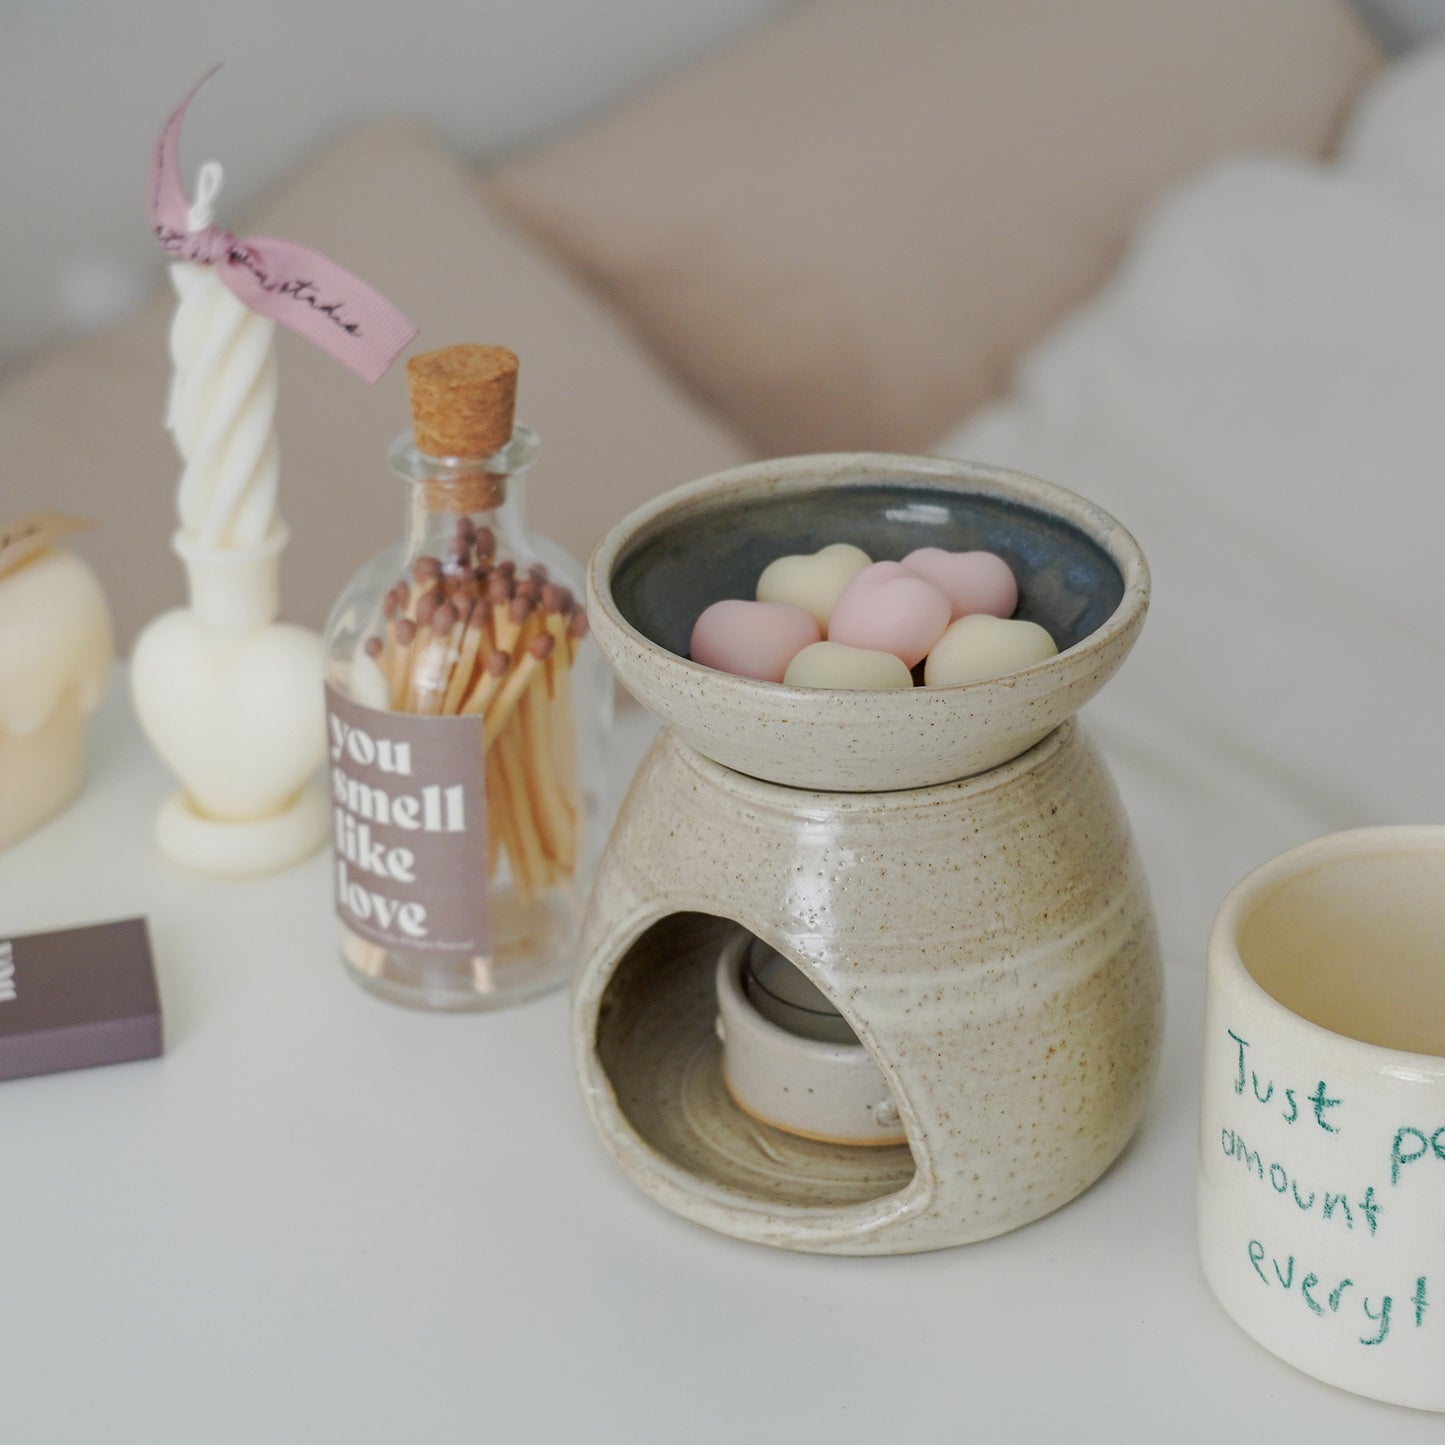 a match bottle with brown sticker inscribed with you smell like love, pink and white heart wax melts in a wax warmer, a ceramic mug, and a heart twist taper candle on the white table